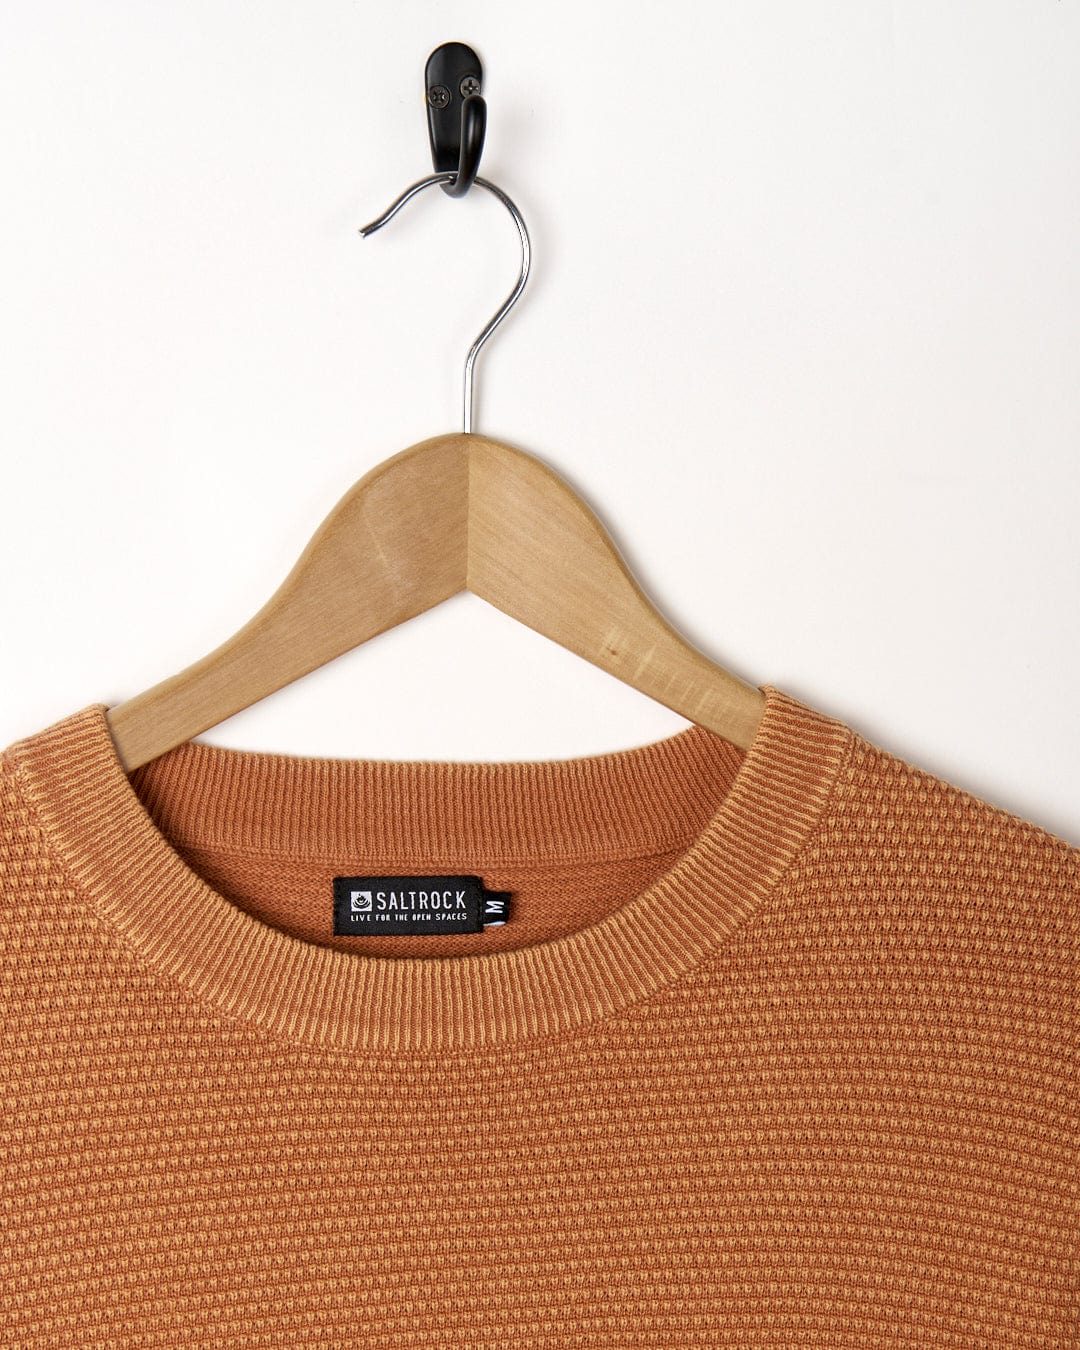 A Moss - Mens Washed Knitted Crew - Orange sweater hanging on a hanger.